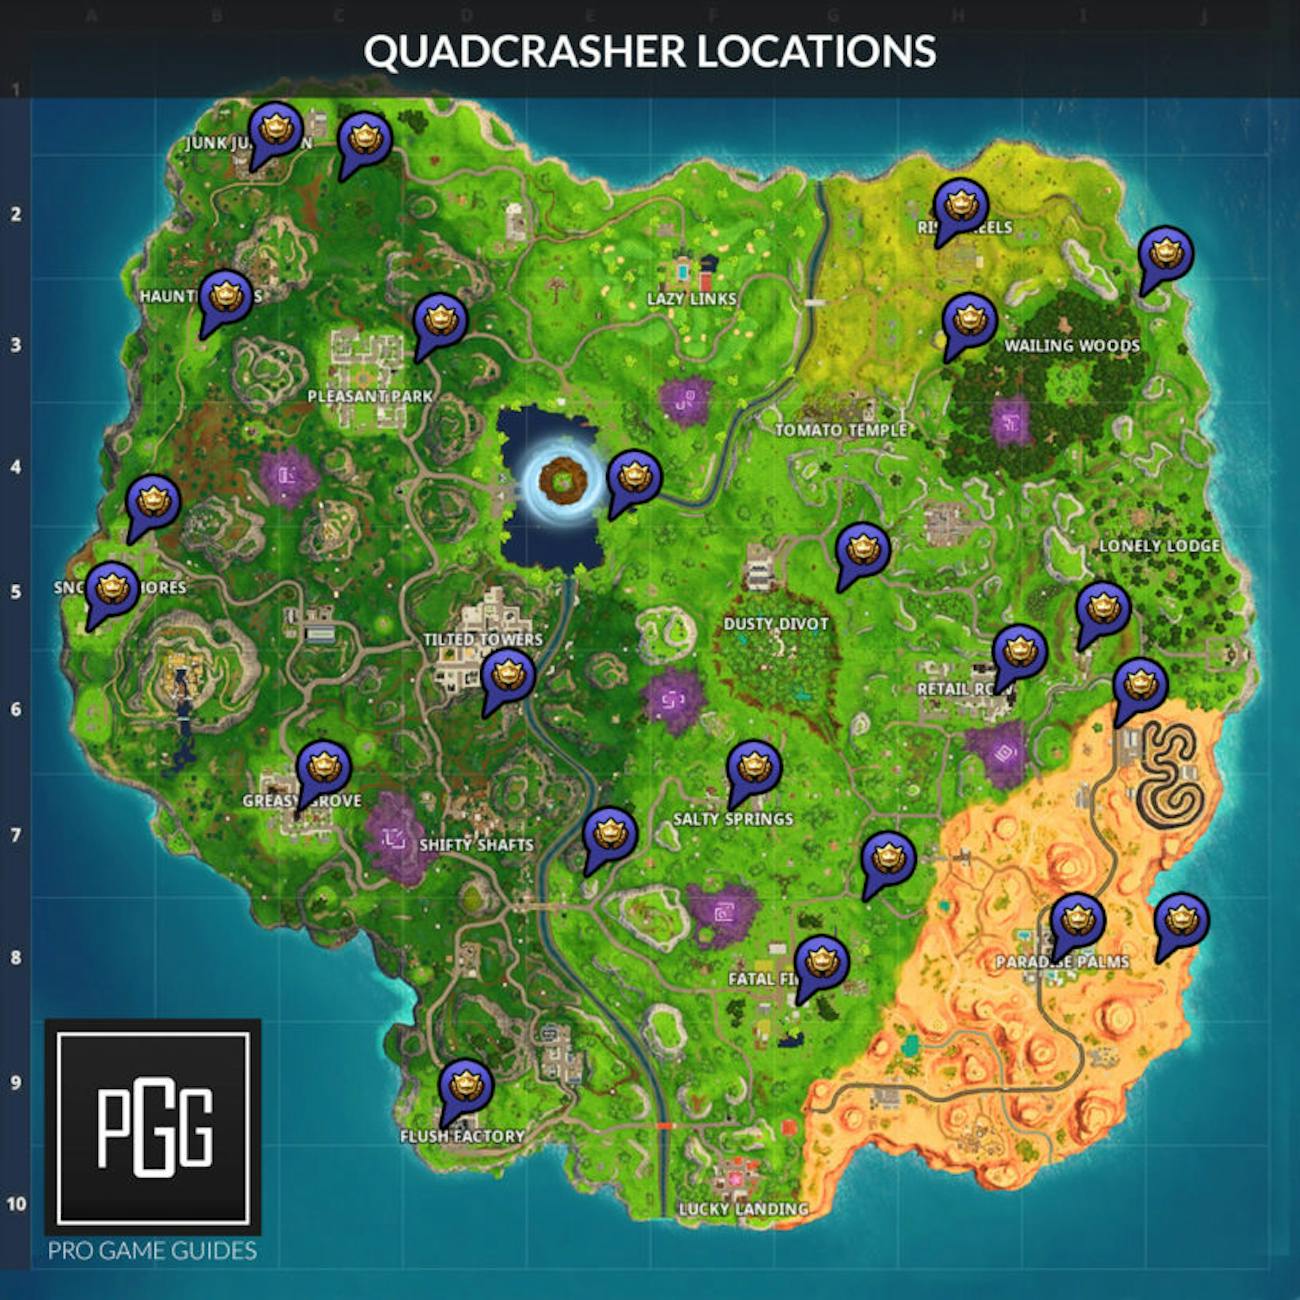 Fortnite Vehicle Timed Trial Locations Video Map And Guide For - fortnite quadcrashers